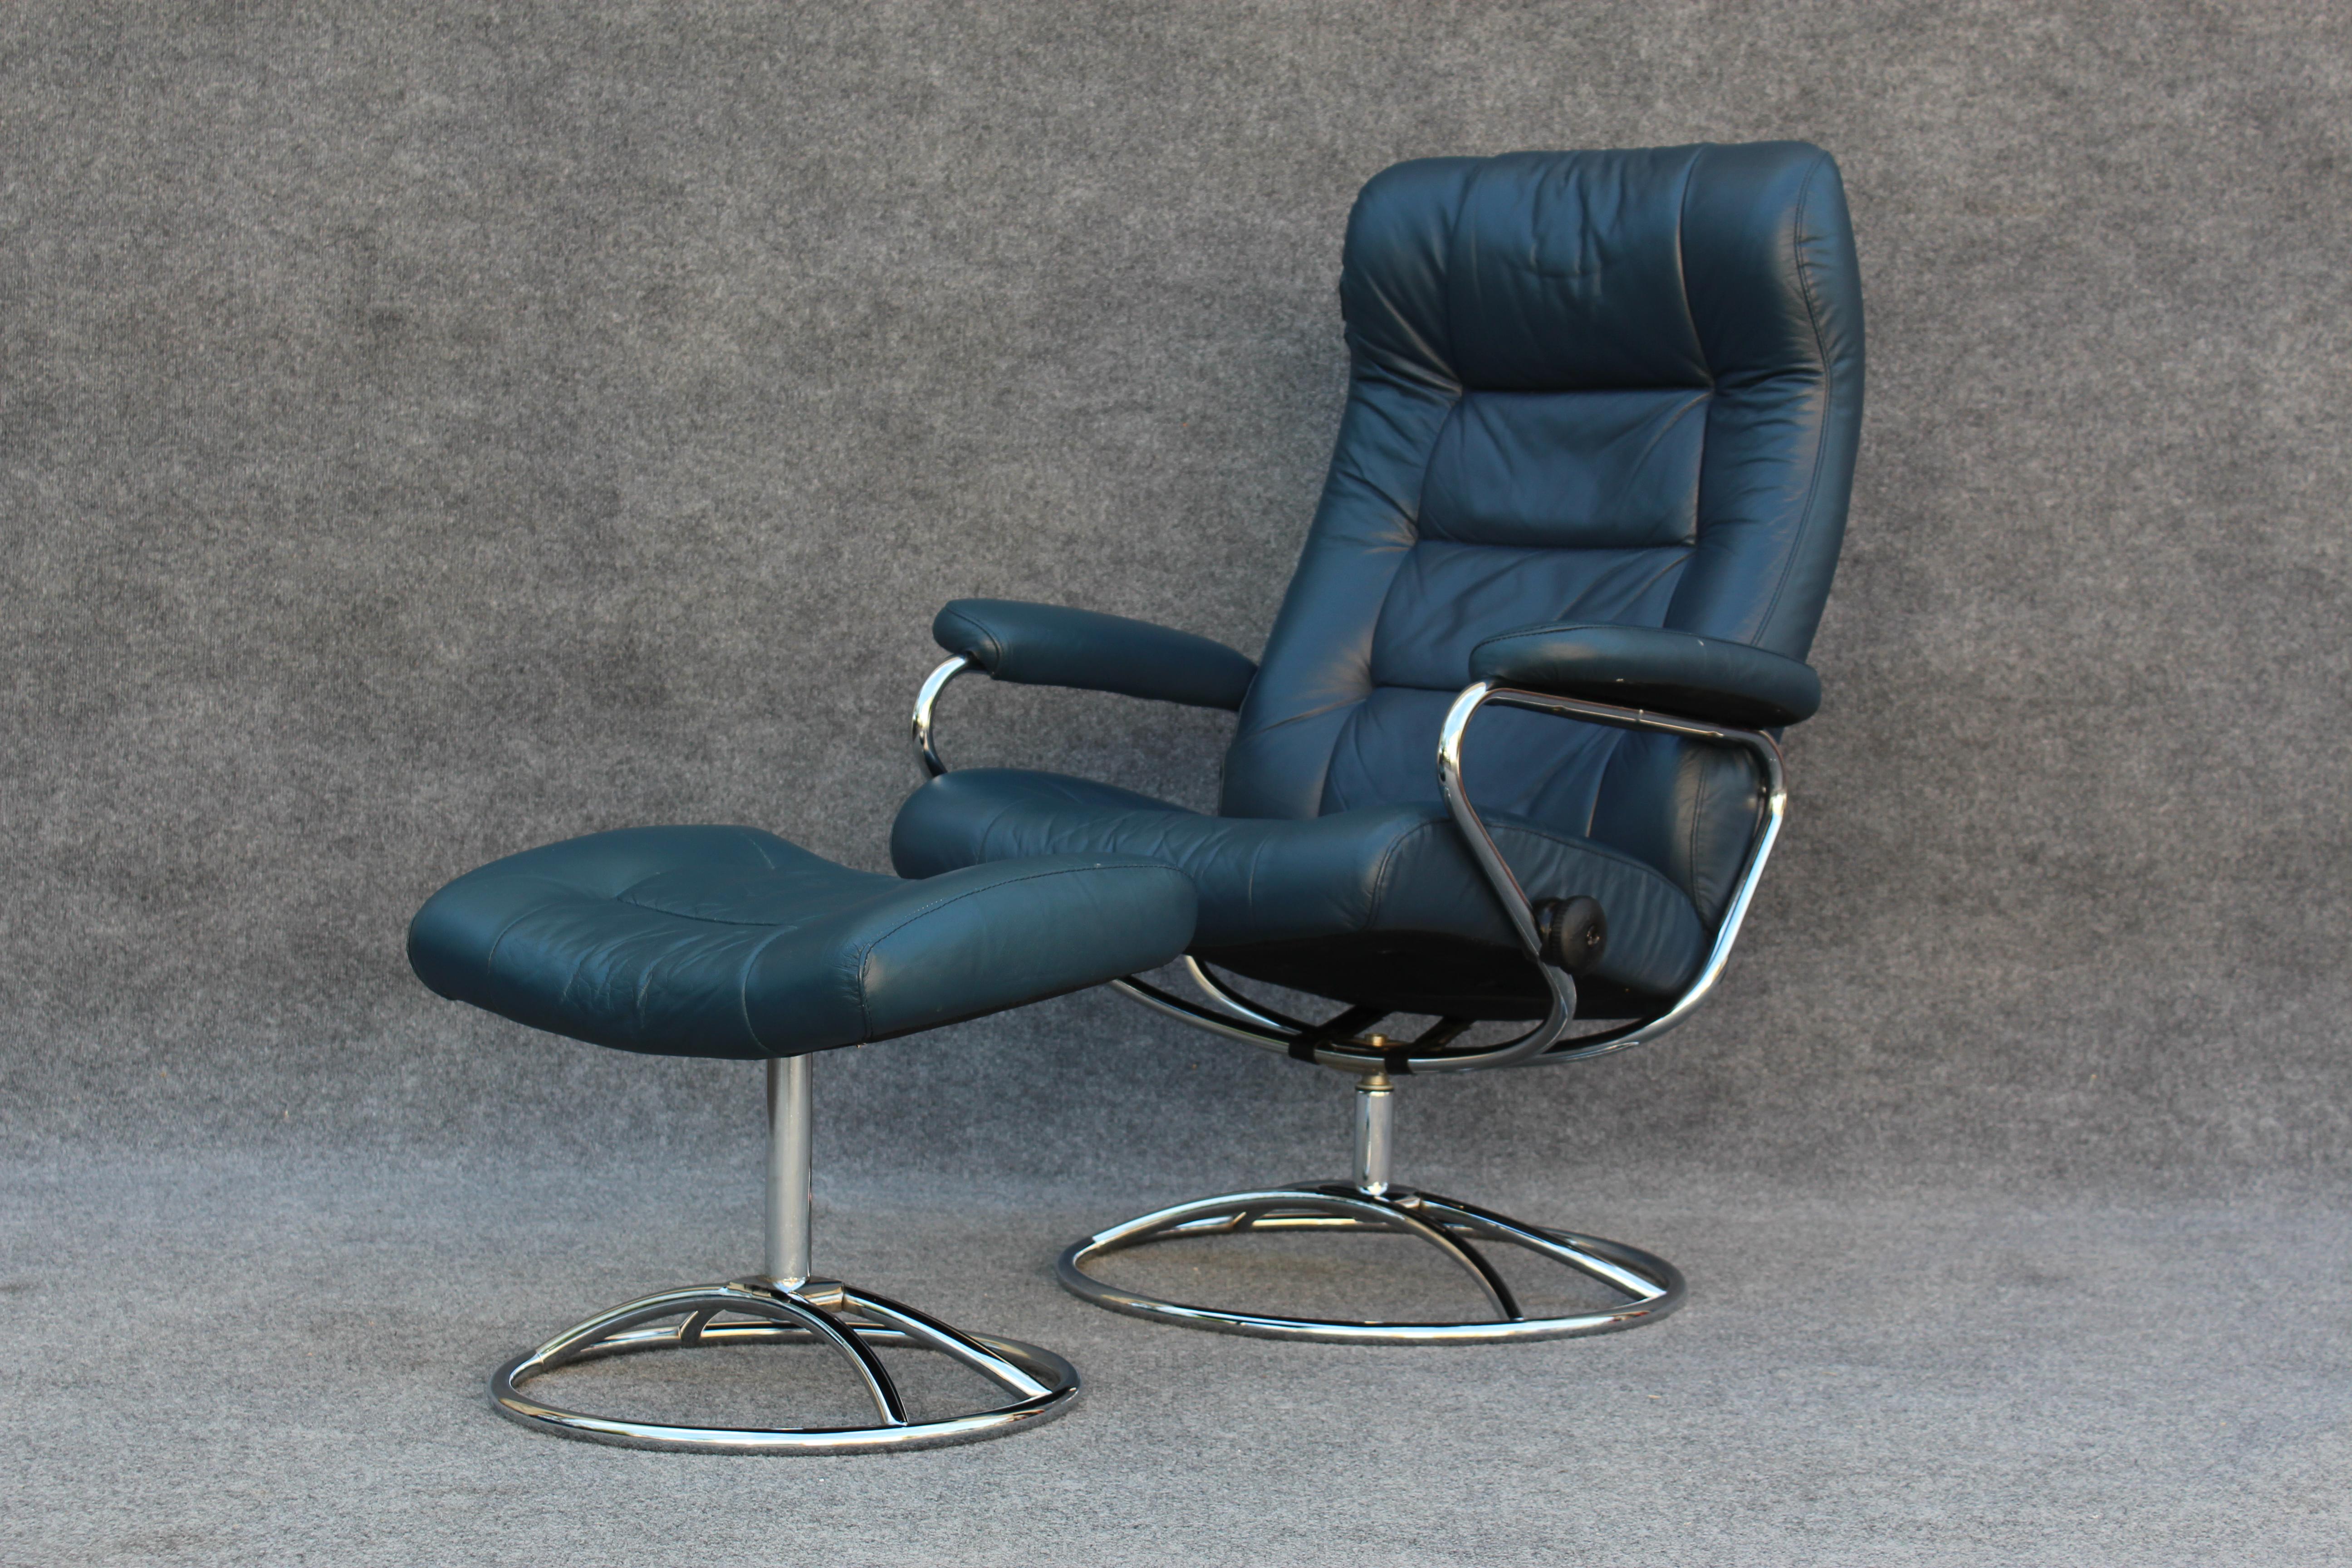 Made by Danish company Ekornes, this chair and ottoman combo is part of their Stressless line of lounge chairs. Like their other chairs, this model is very comfortable and fully adjustable to an almost horizontal position. Set on a dynamic chromed